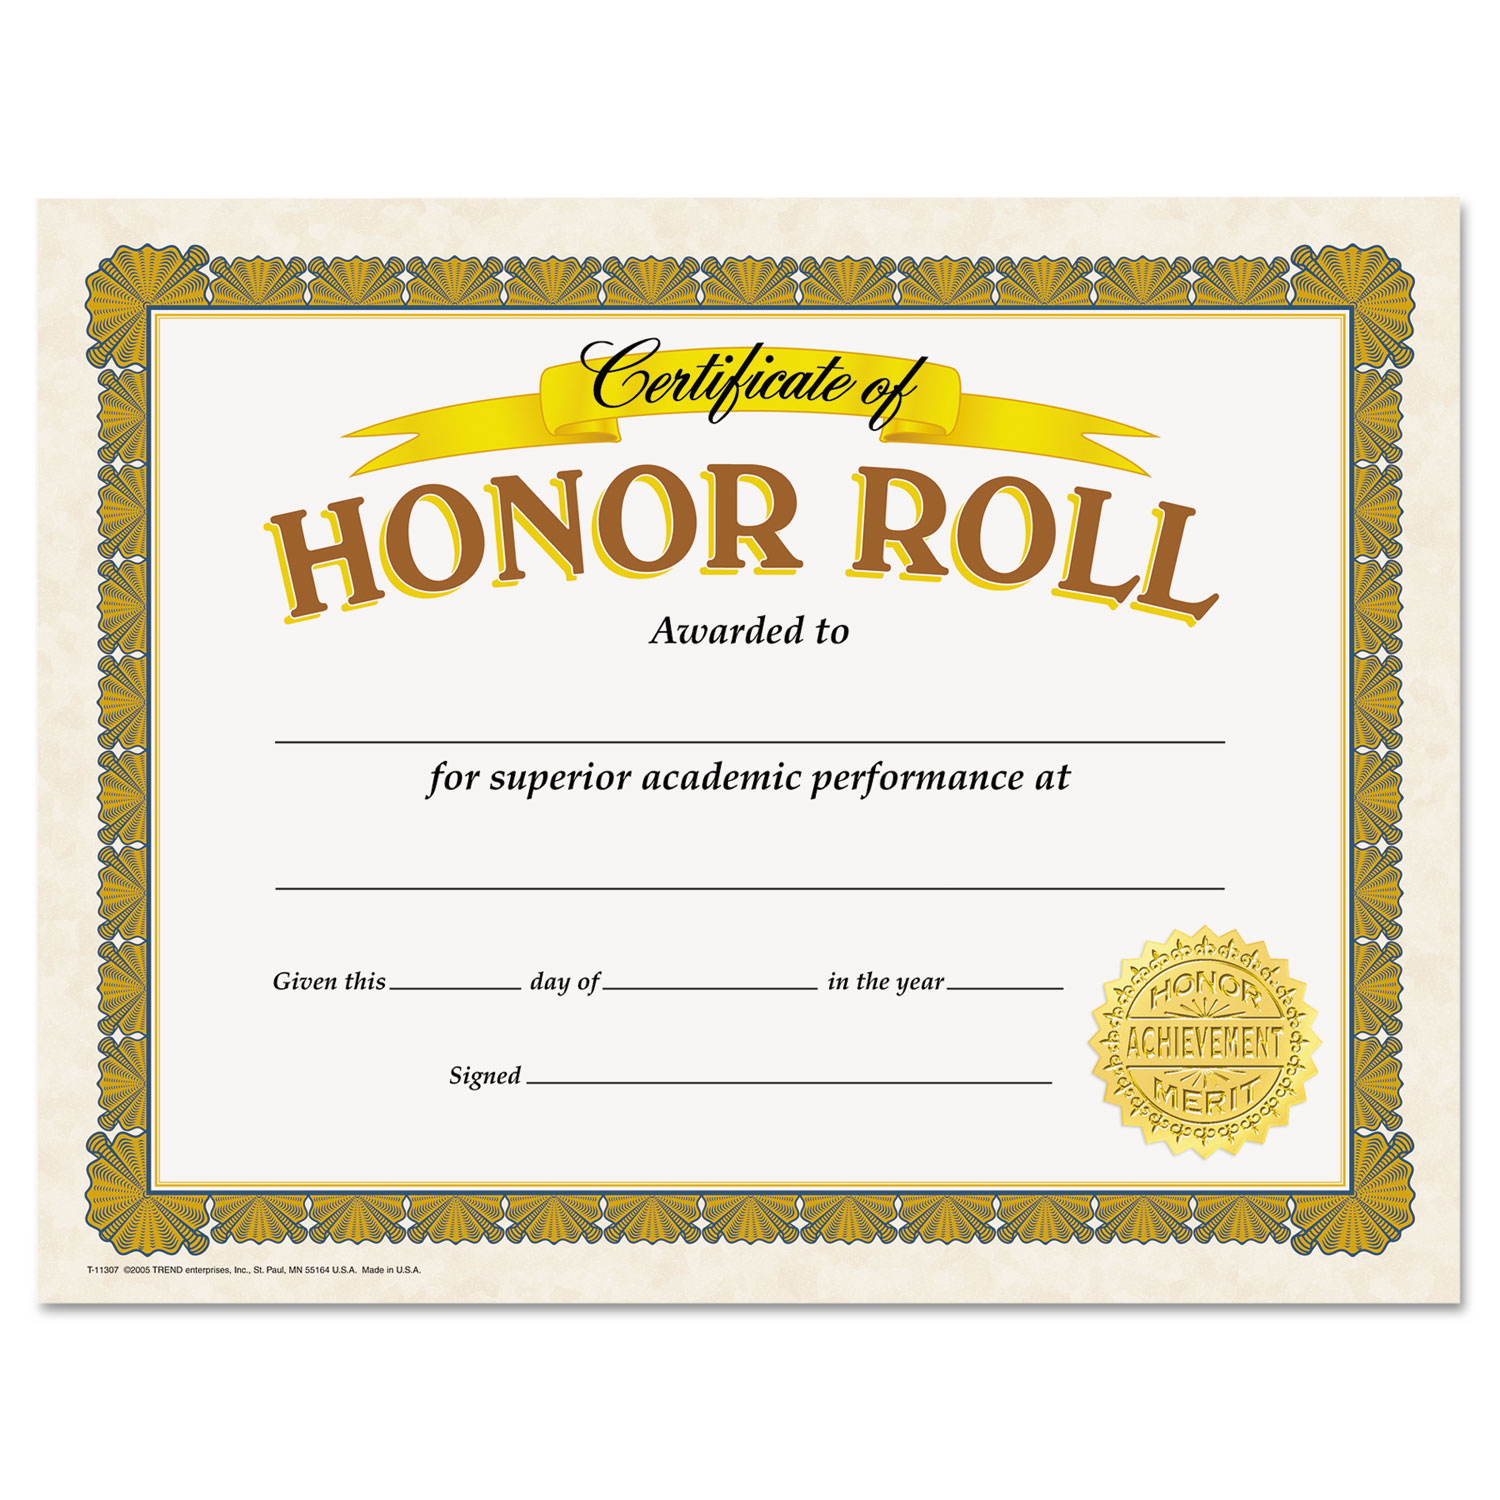  TREND T11307 Awards and Certificates, Honor Roll, 8 1/2 x 11, White/Brown/Gold (TEPT11307) 